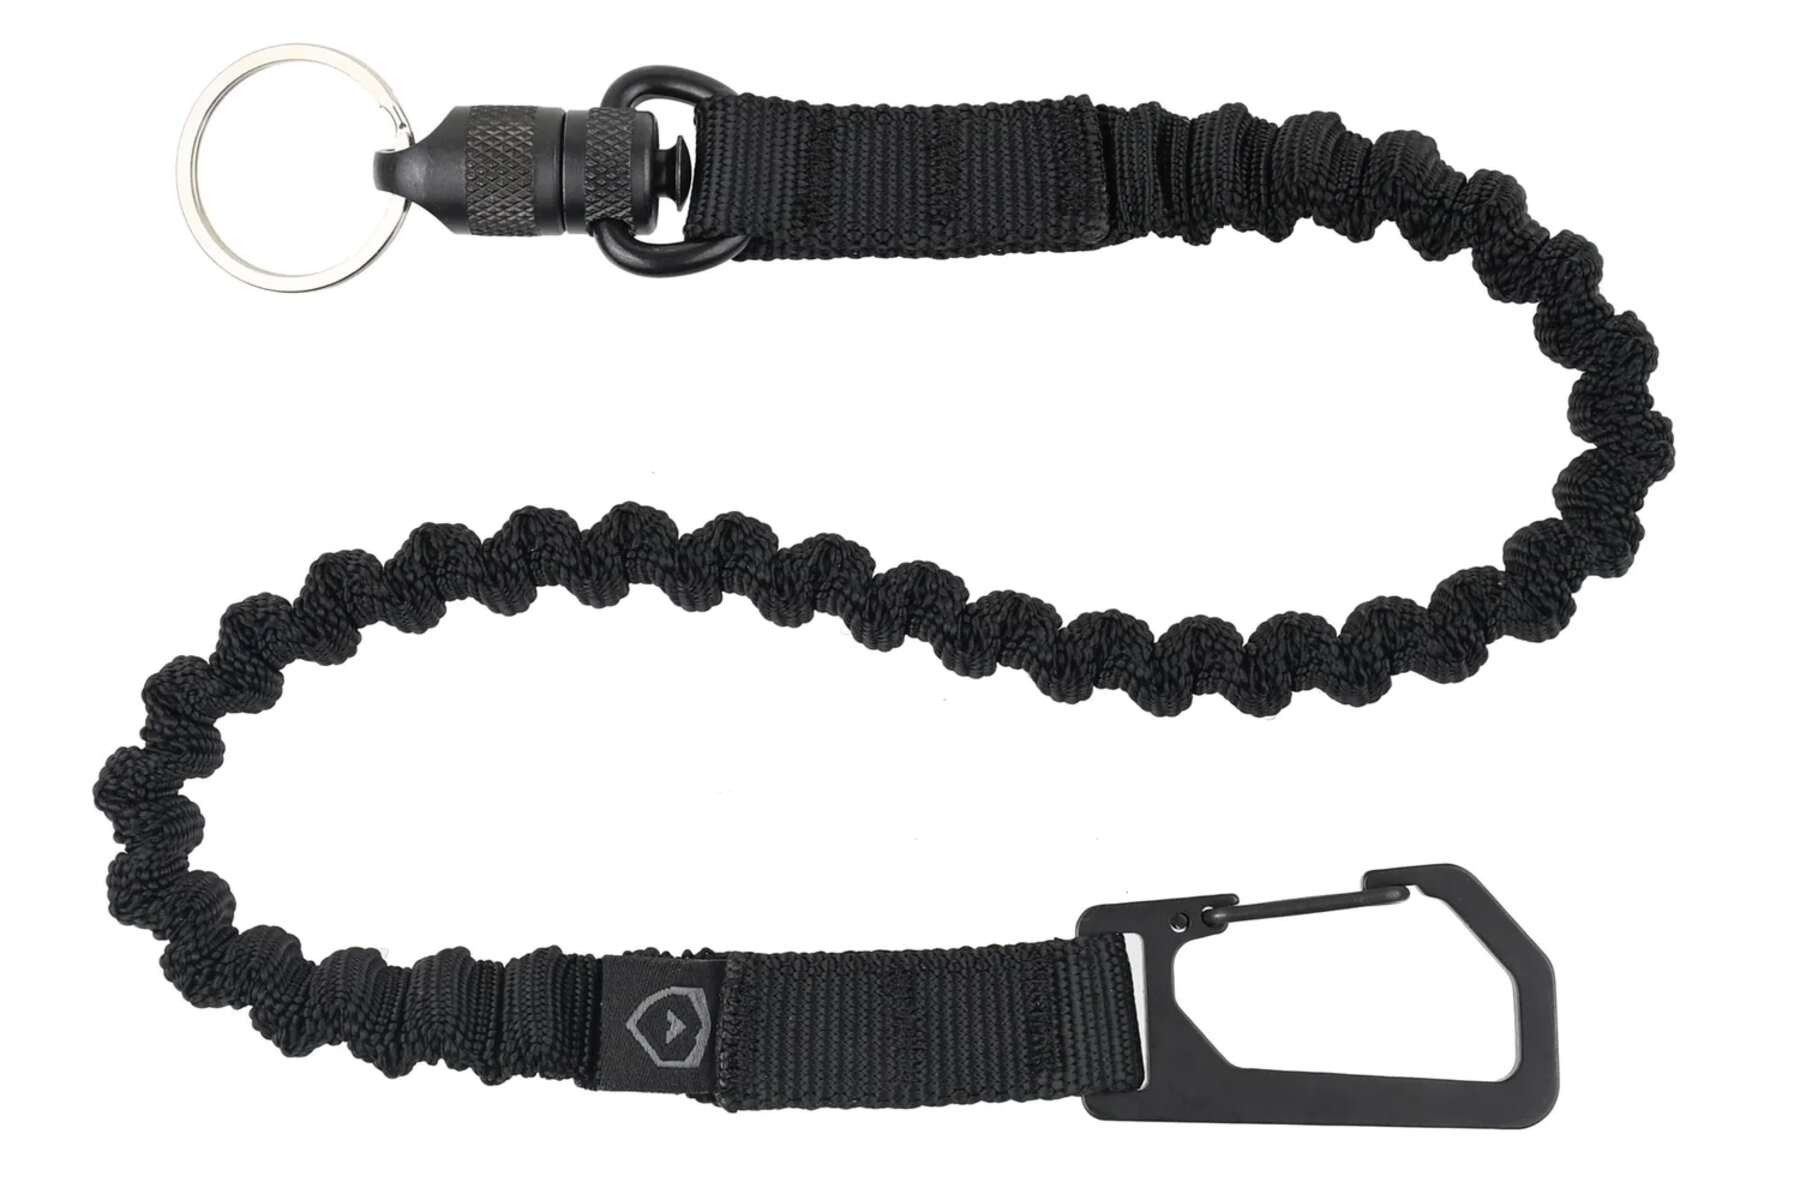 A Guide To Properly Shortening Lanyards